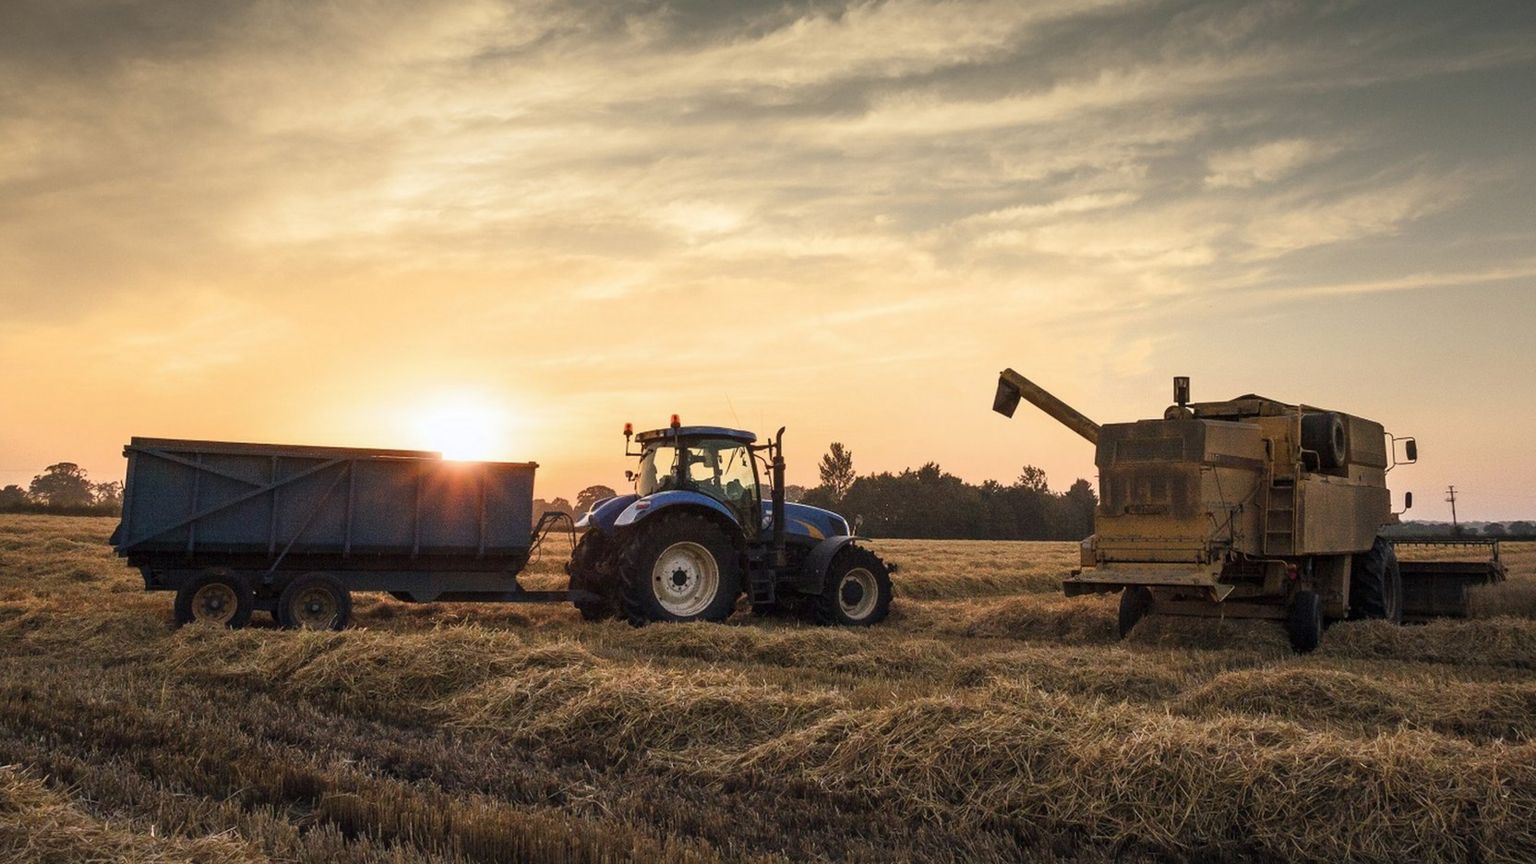 A tractor and combine harvester at sunset in a cornfield